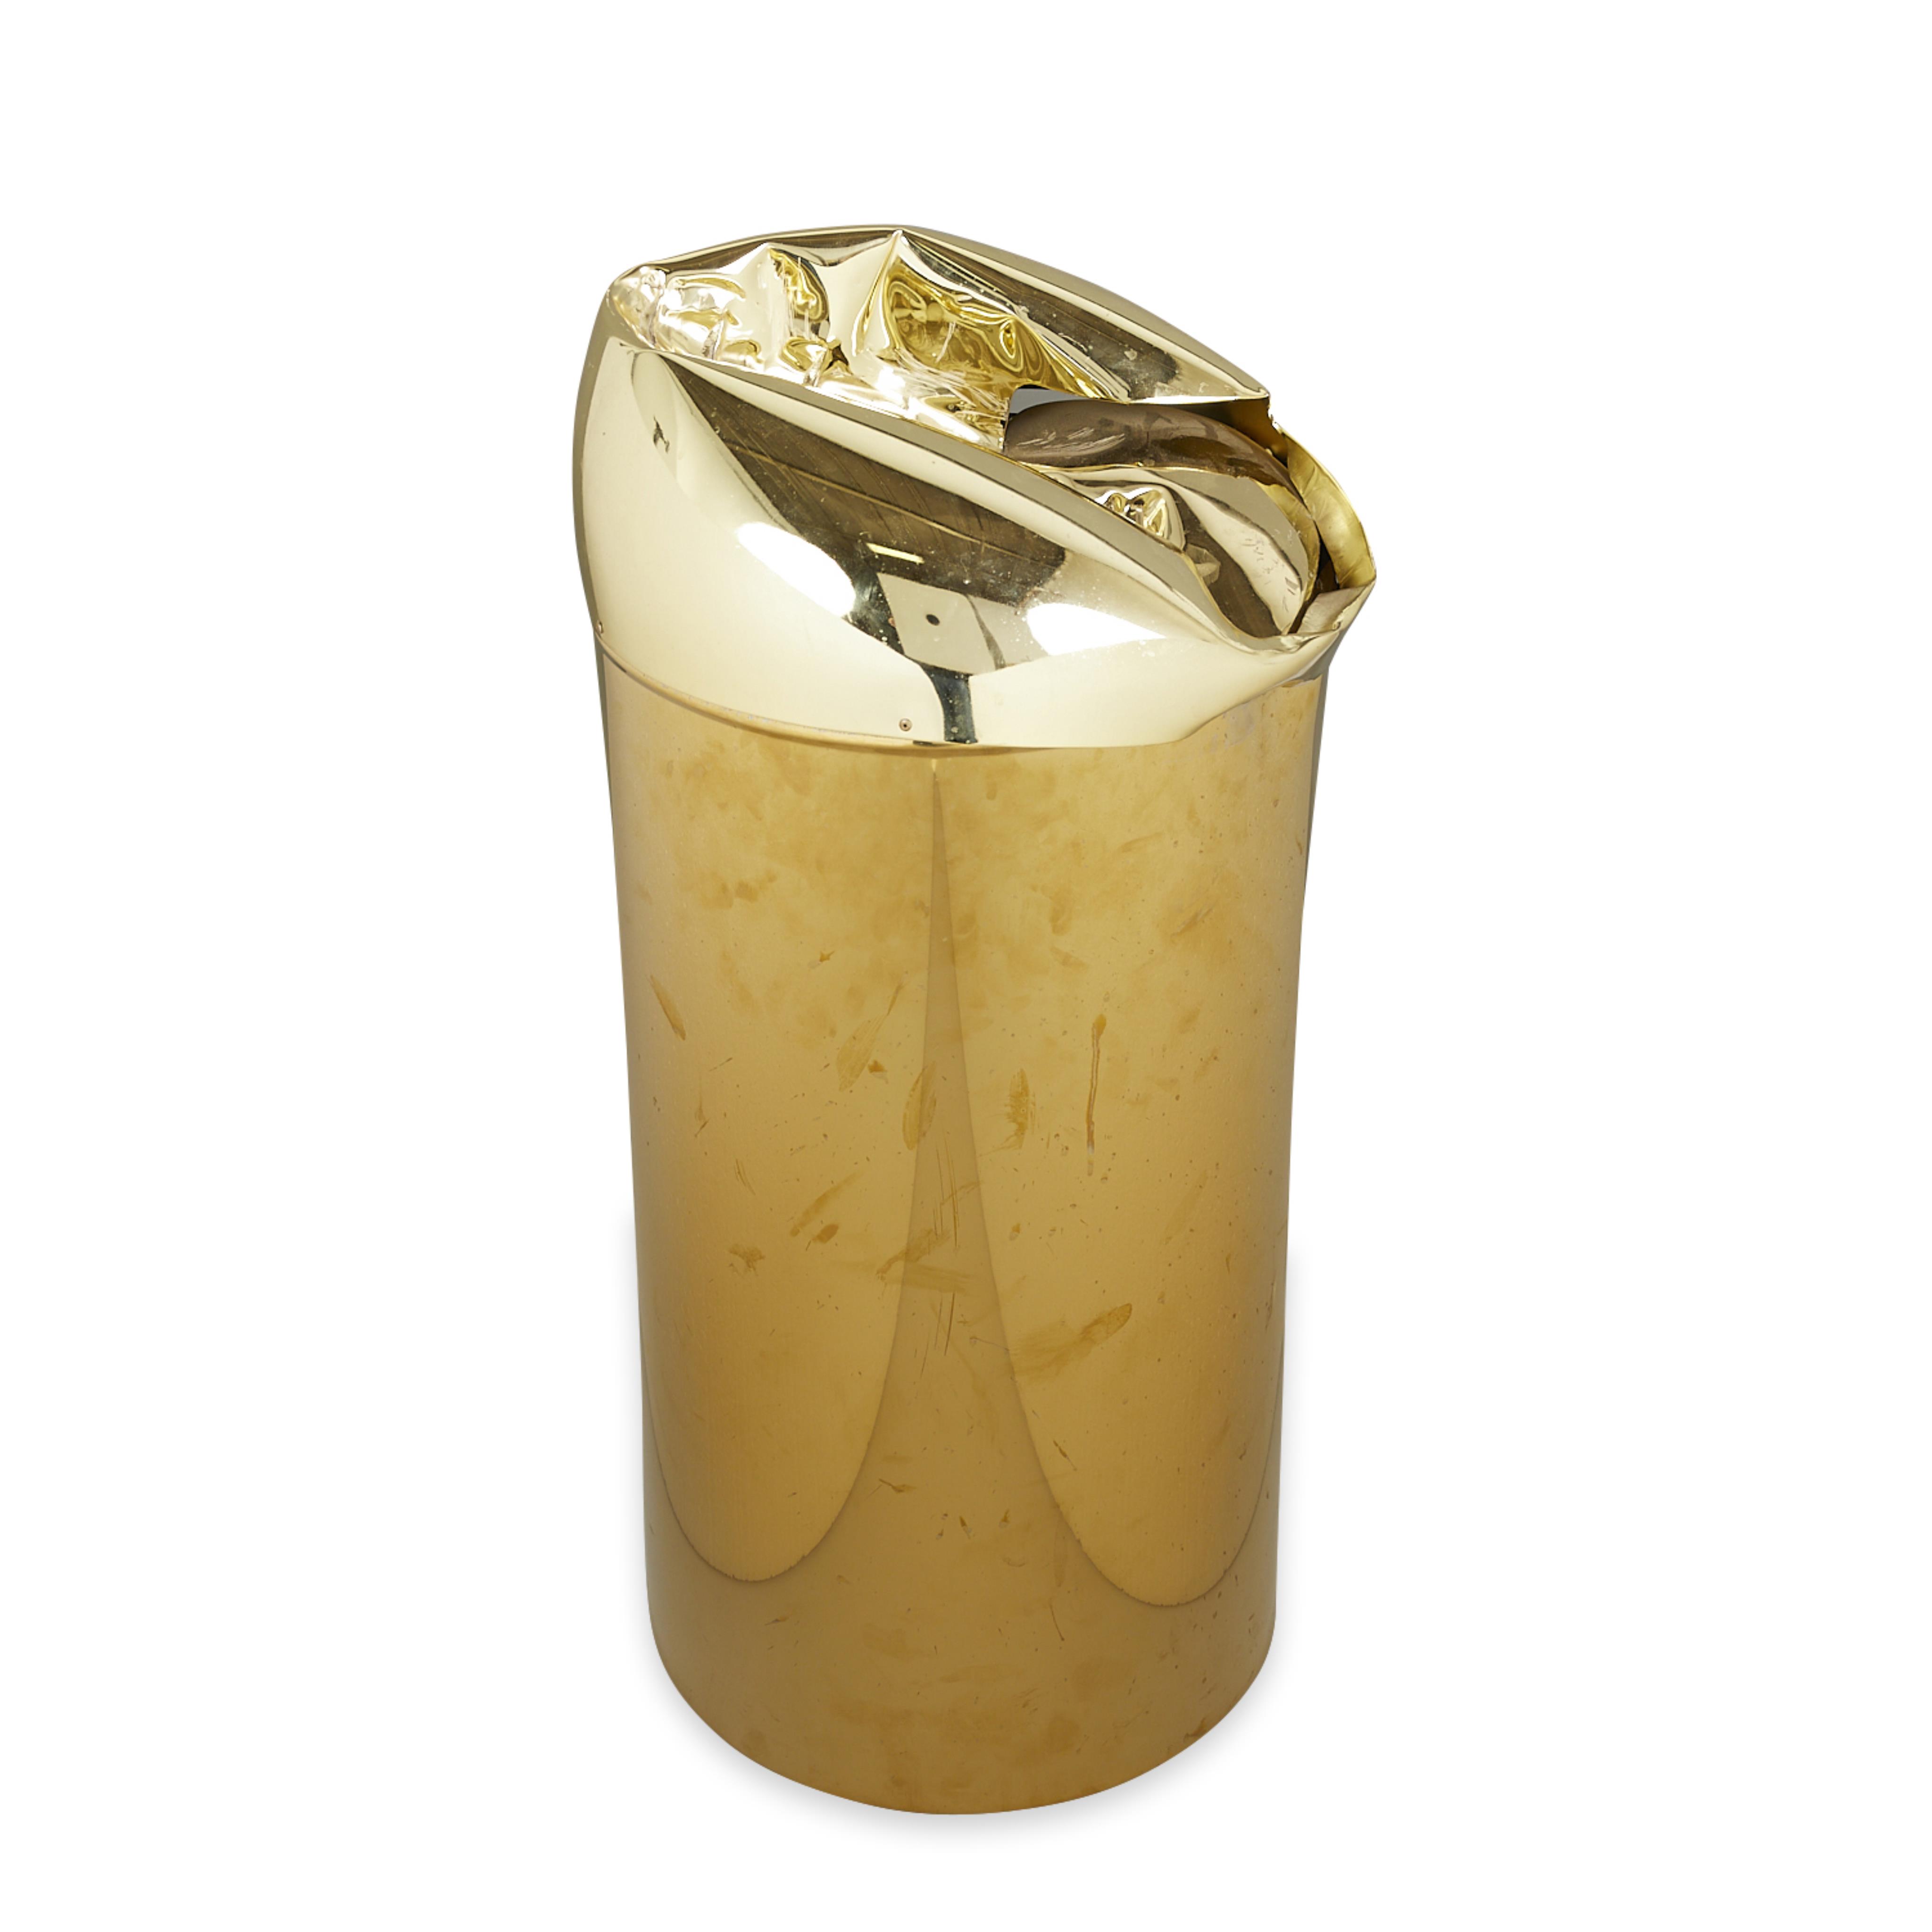 Joe Smith Gold-Tone Garbage Can 2008 - Image 7 of 12